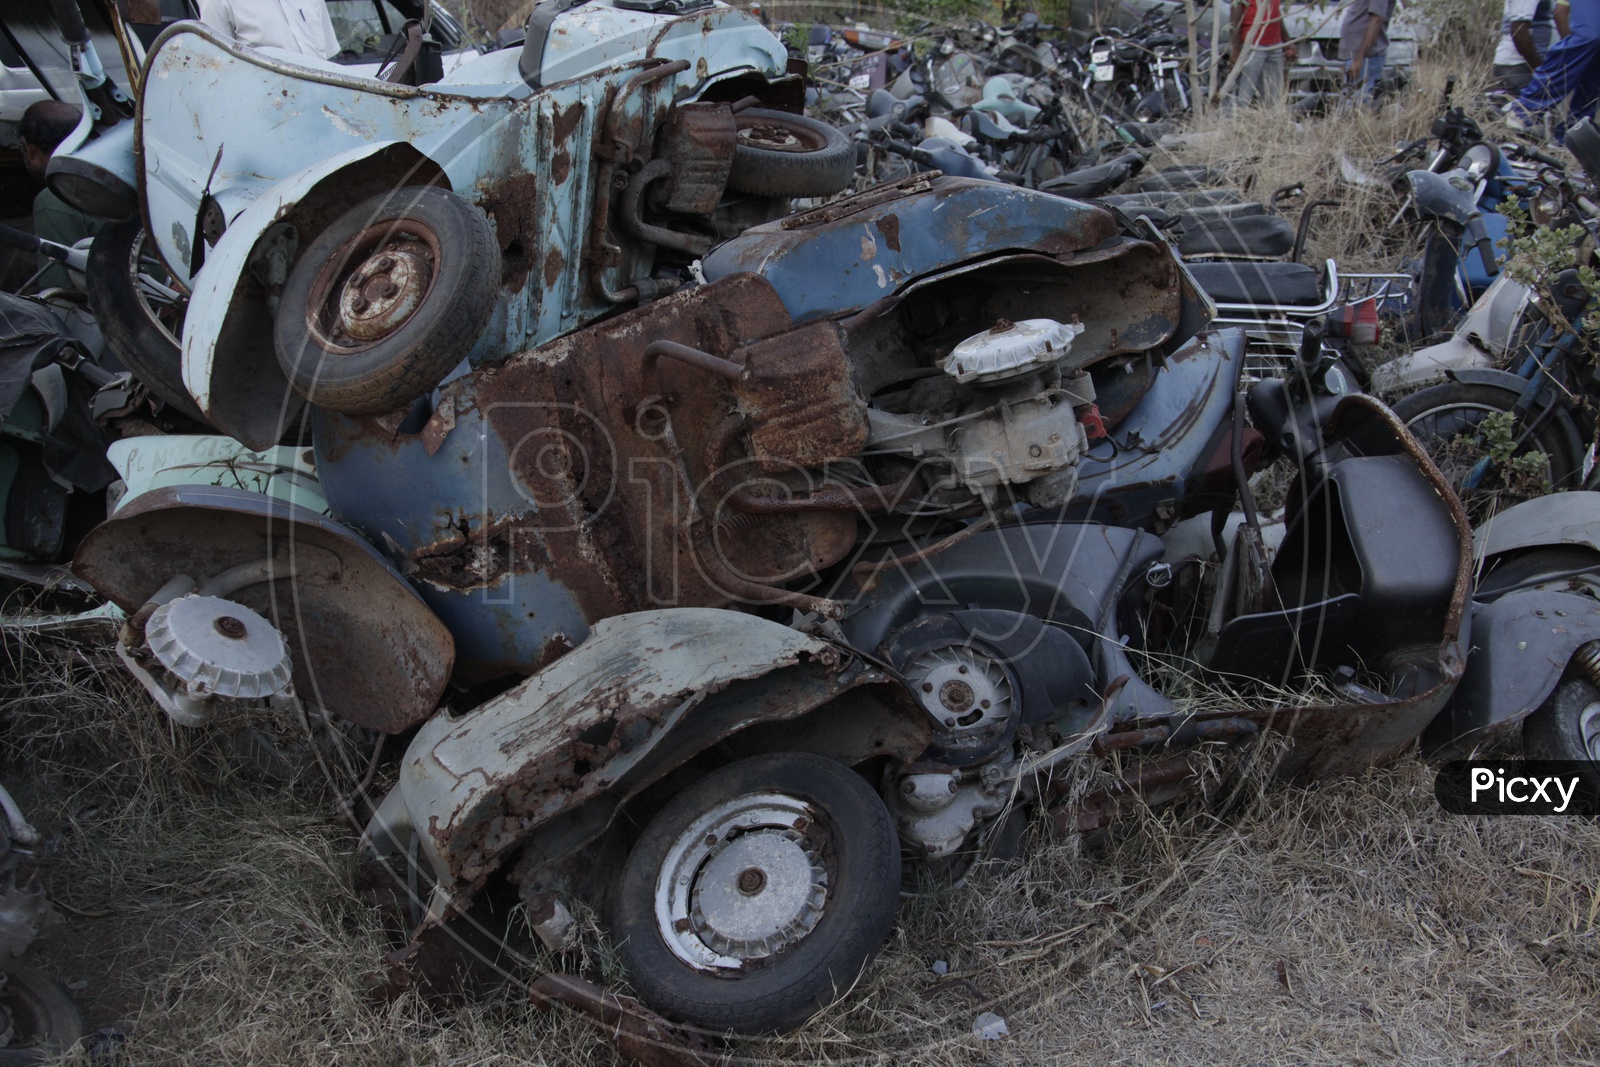 Old Rusted And Wrecked Vehicles  In a Place